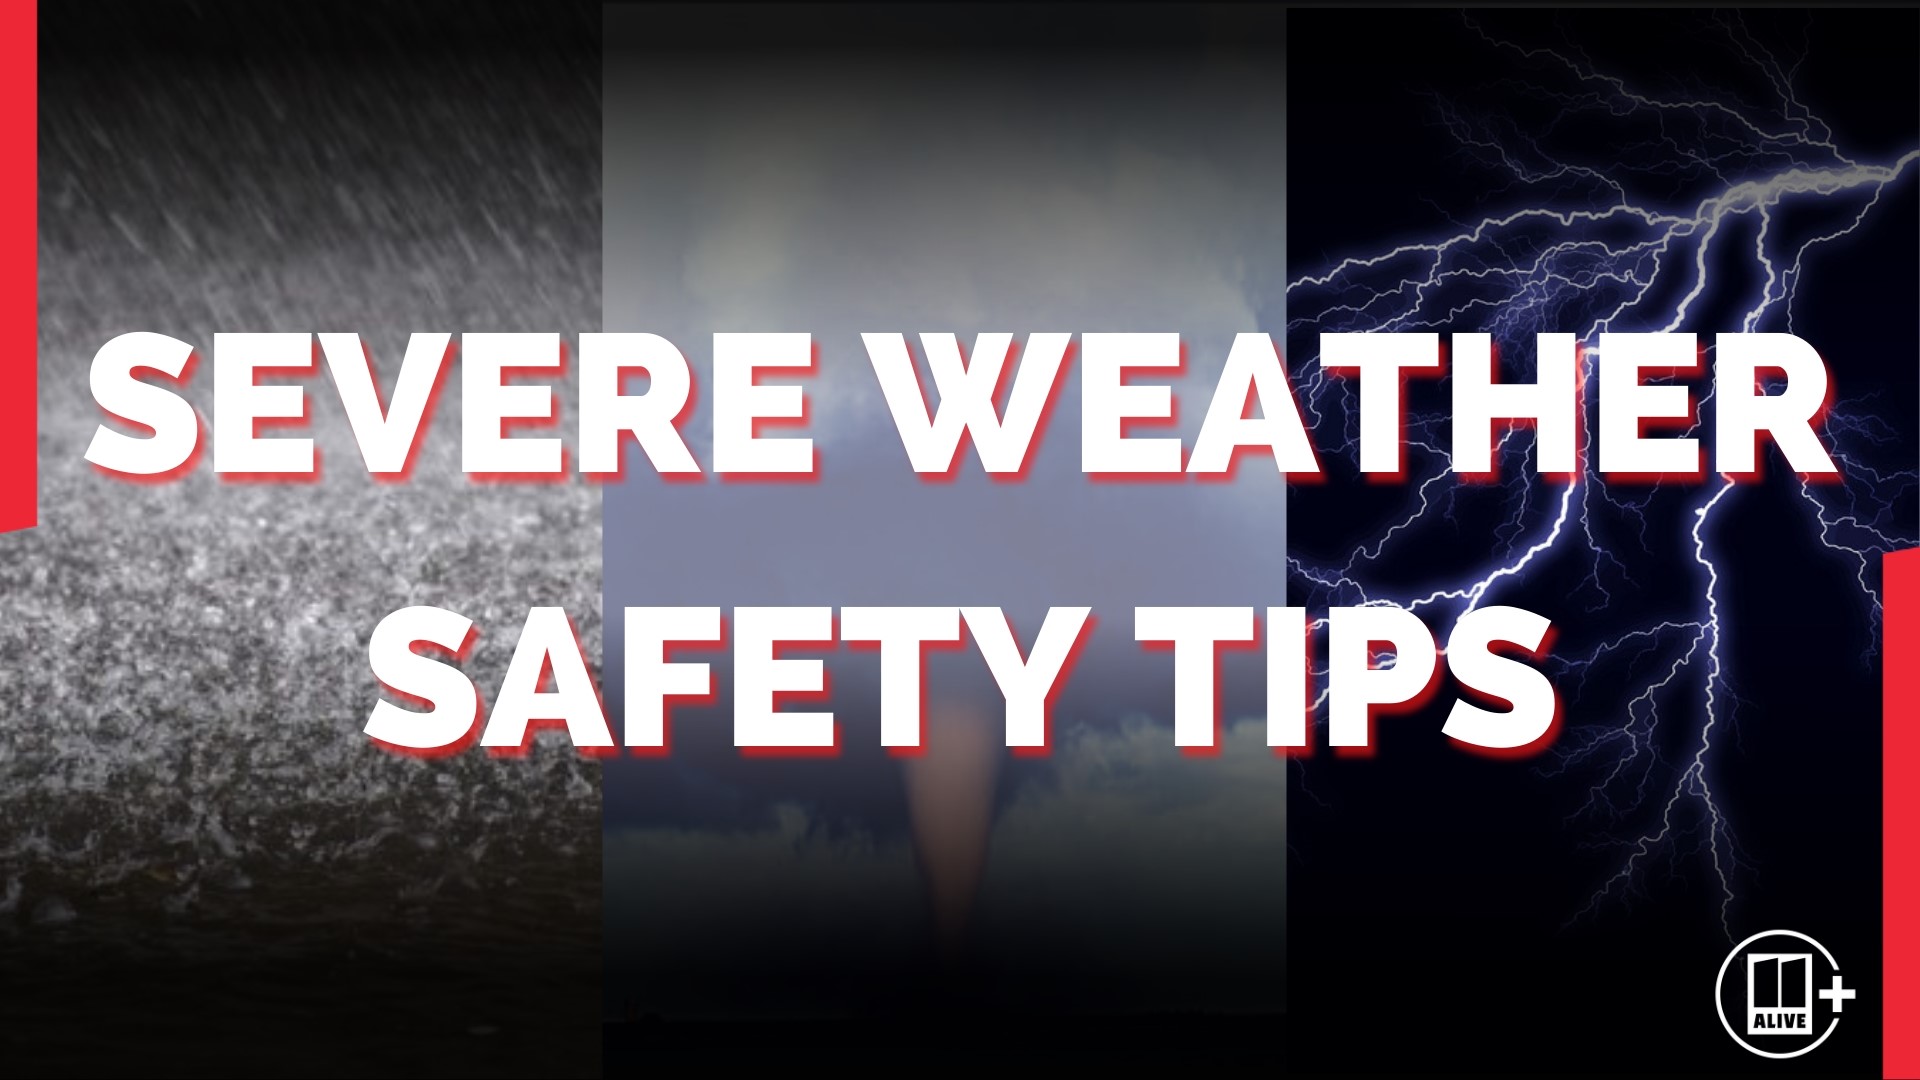 The 11Alive weather team shares tips for keeping you and your family safe ahead of and during severe weather.